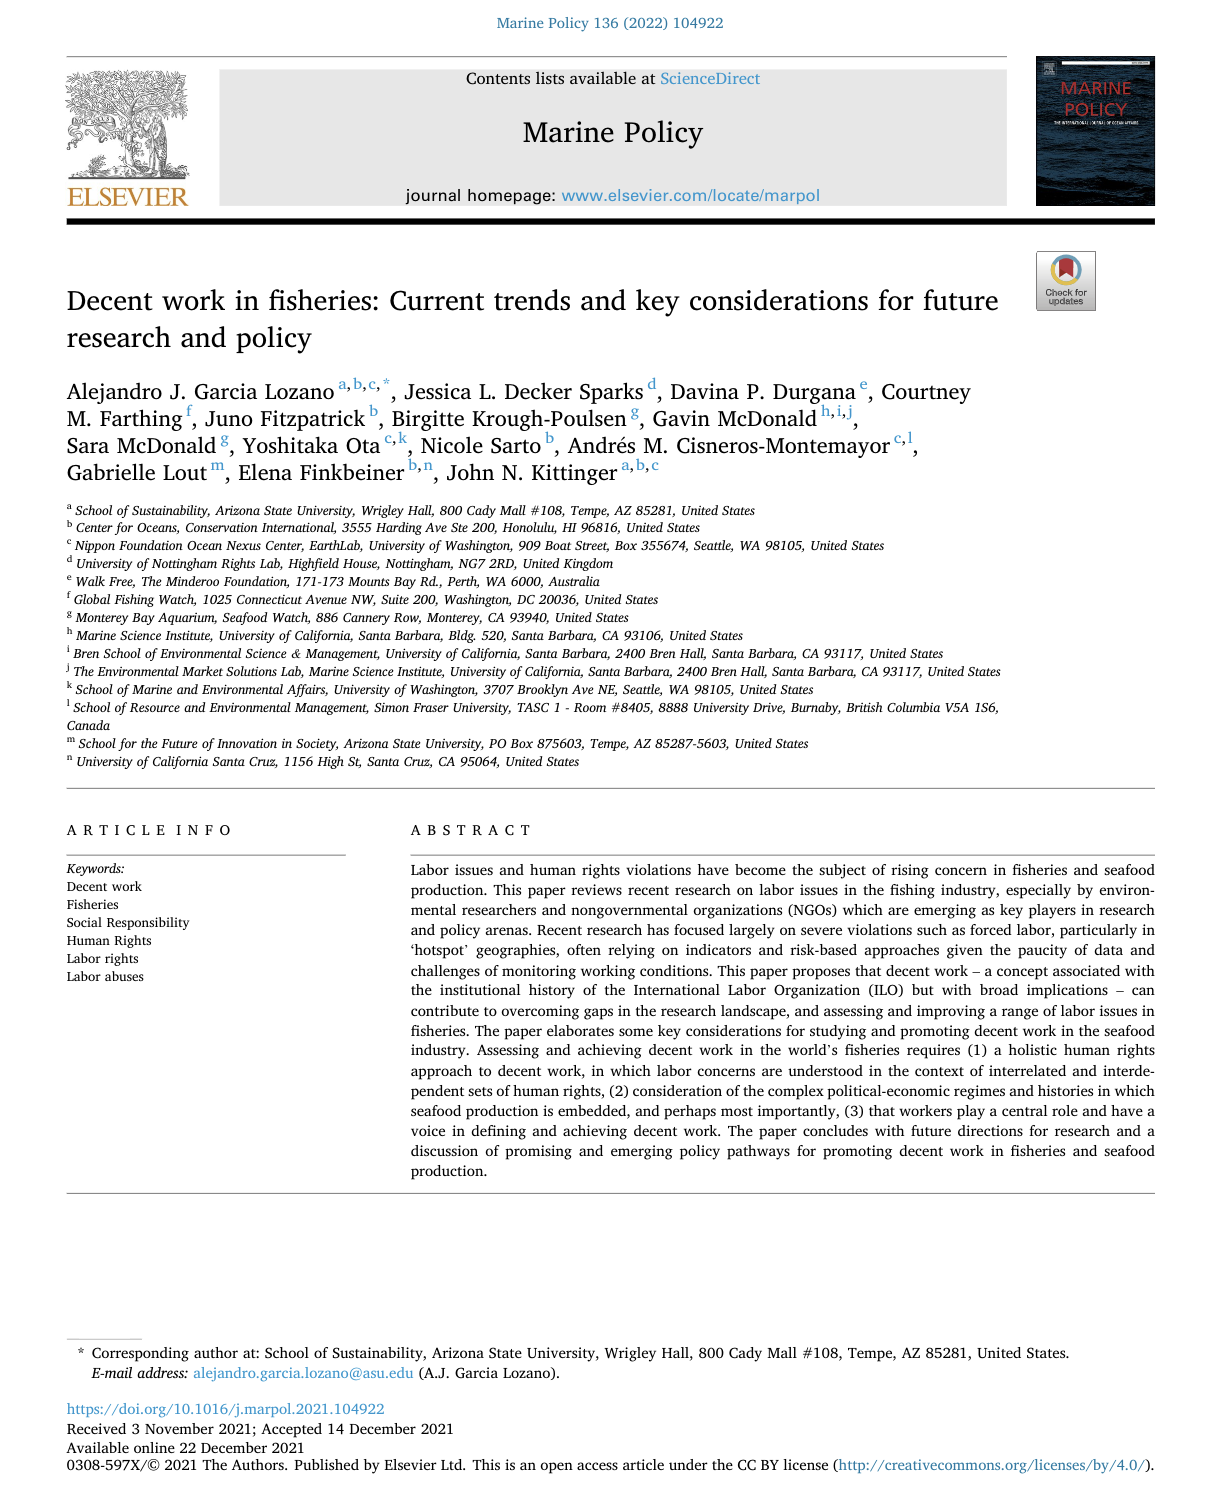 Decent Work in Fisheries: Current Trends and Key Considerations for Future Research and Policy